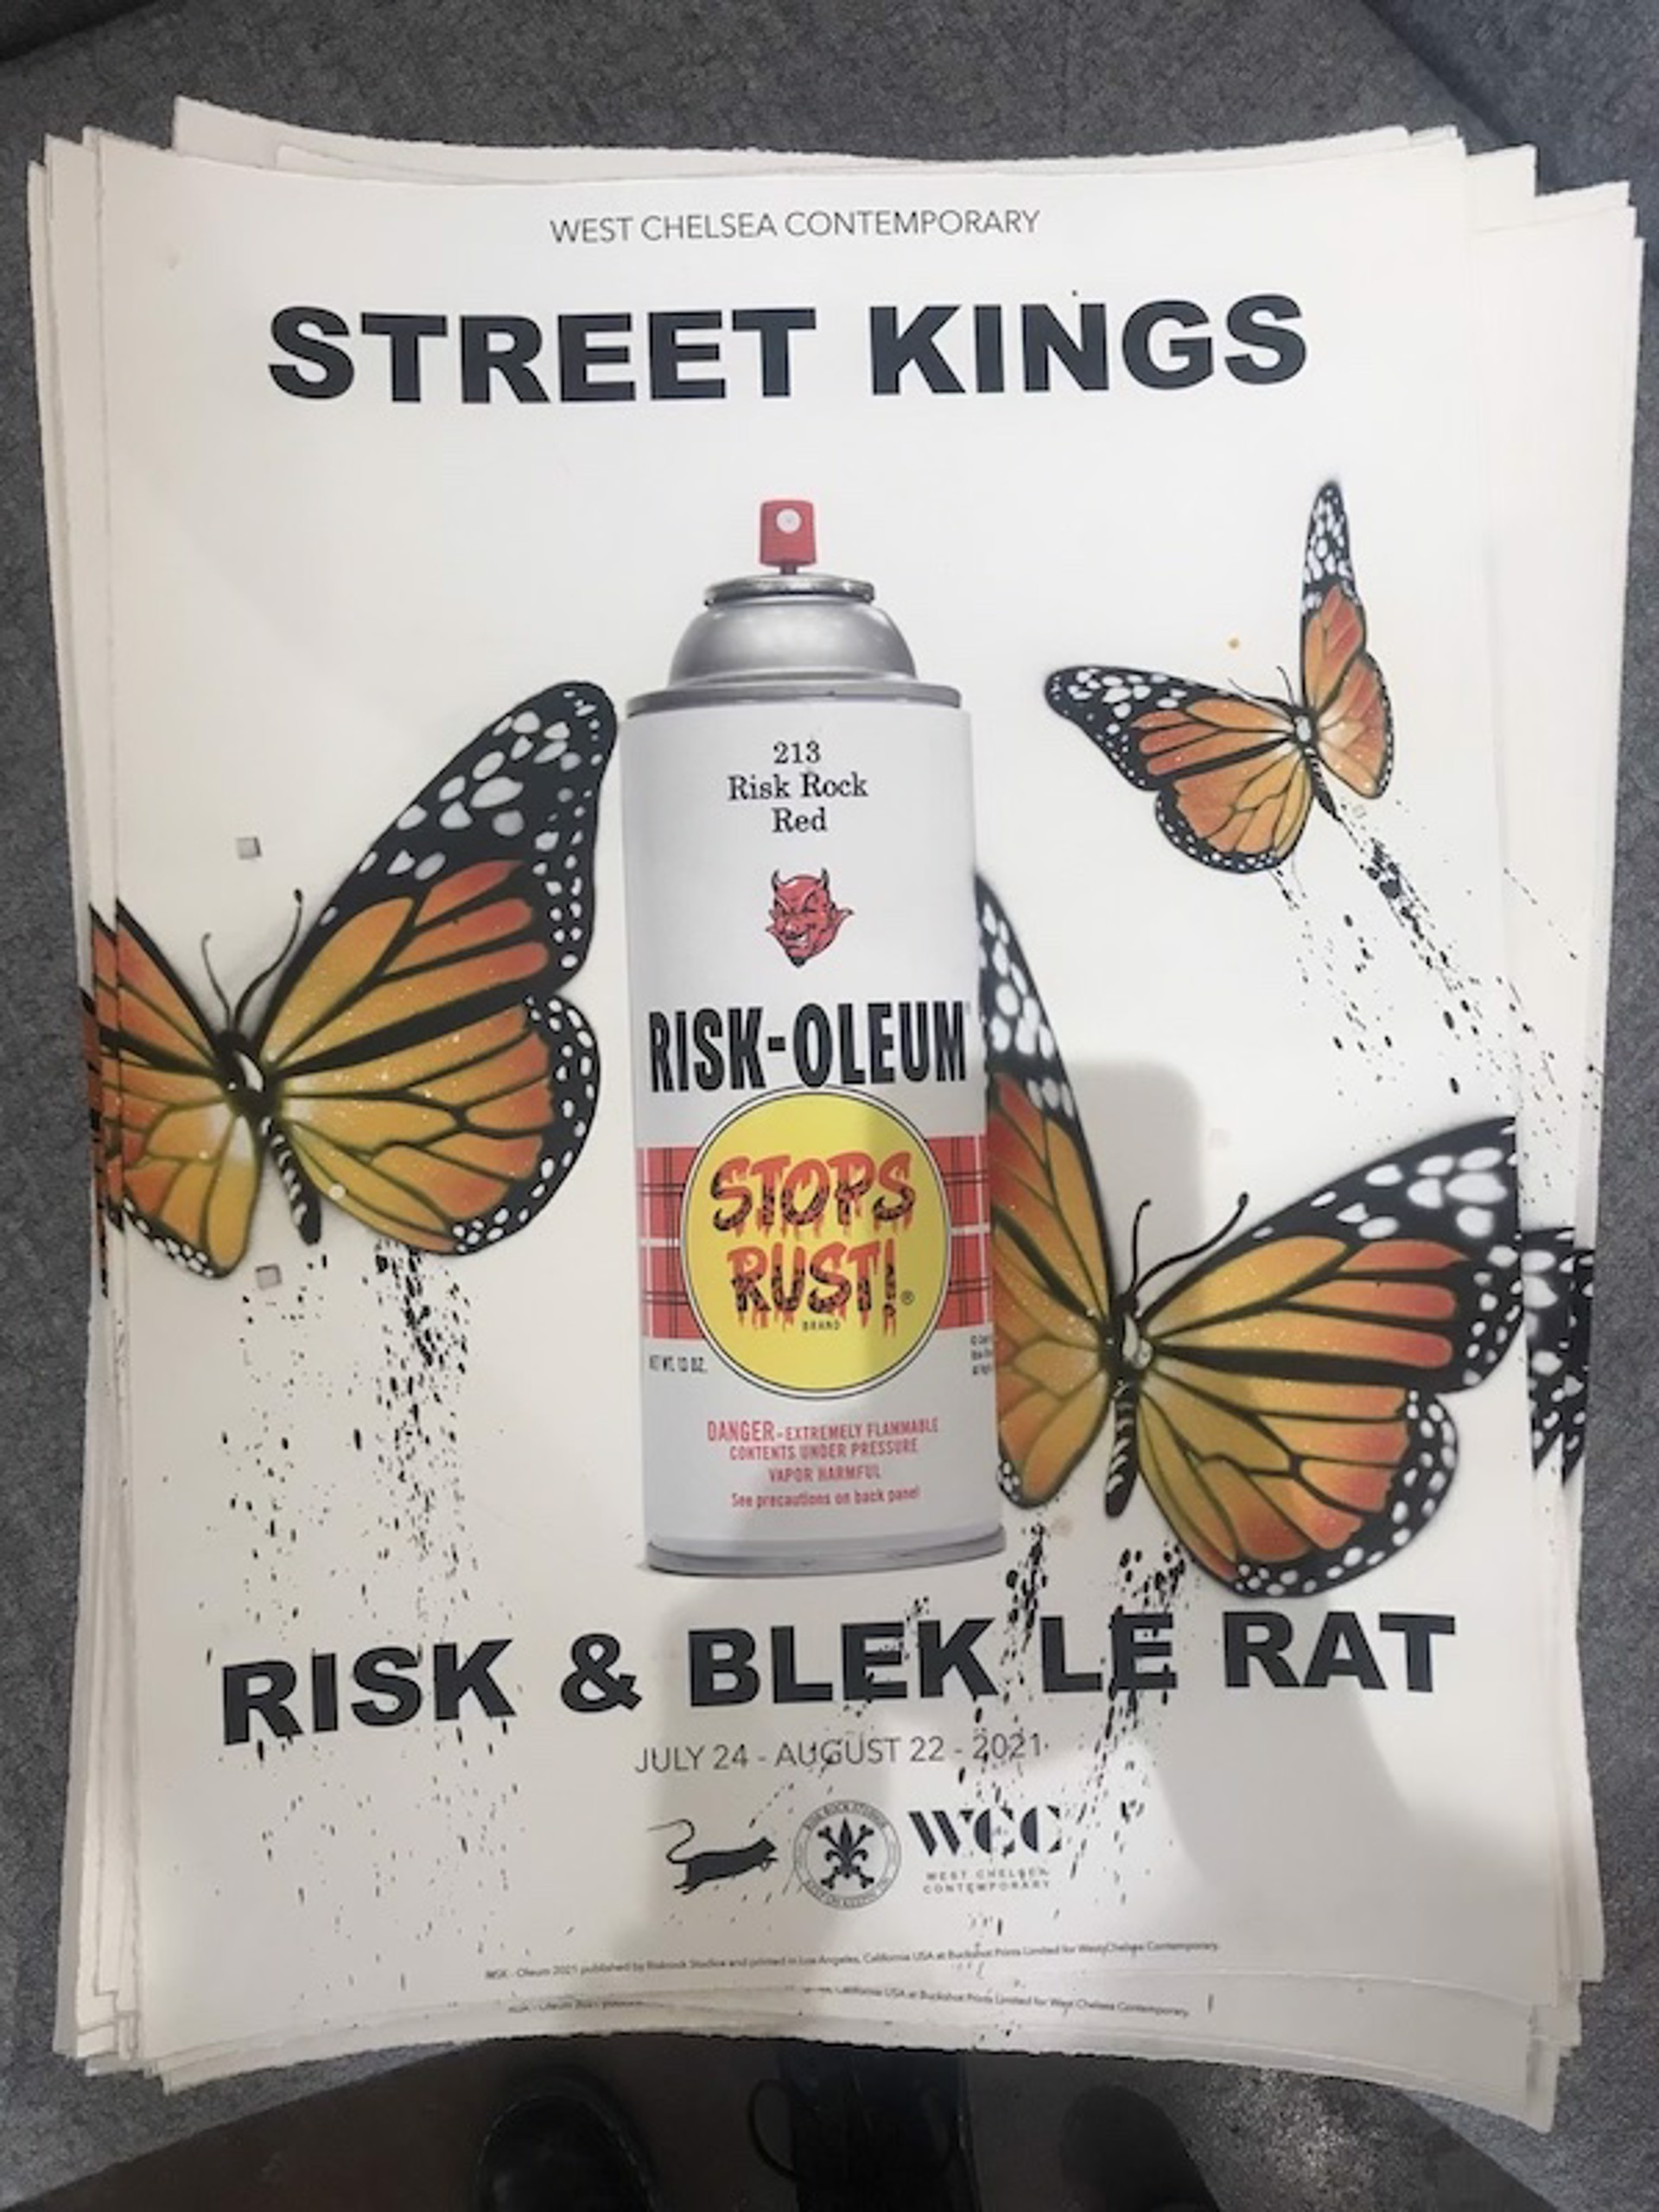 Street Kings Show Print (49/50) by Risk